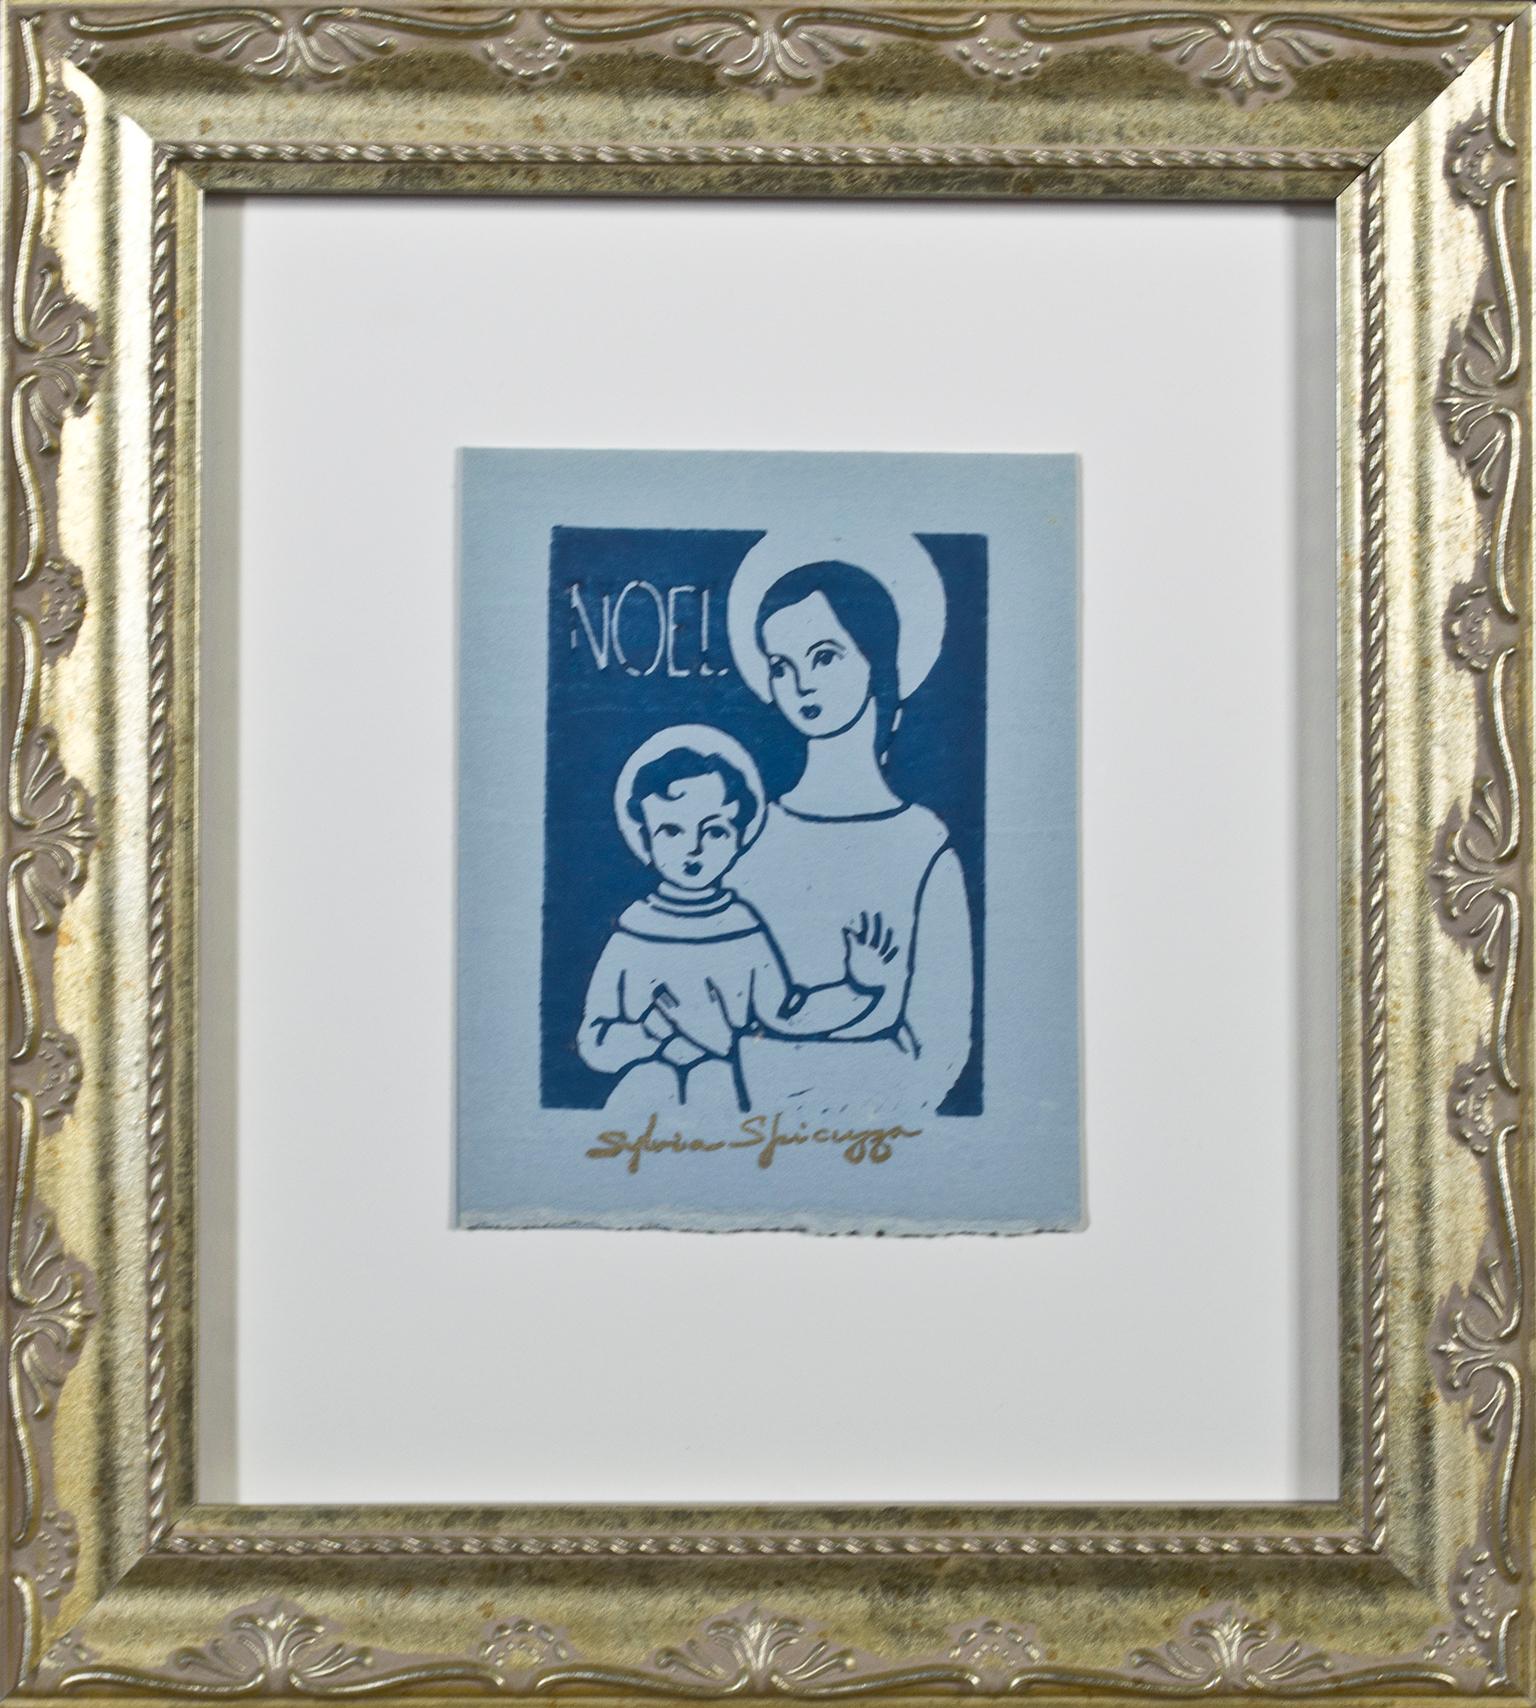 "Noel, " Religious Linocut on Blue Paper stamped signature by Sylvia Spicuzza